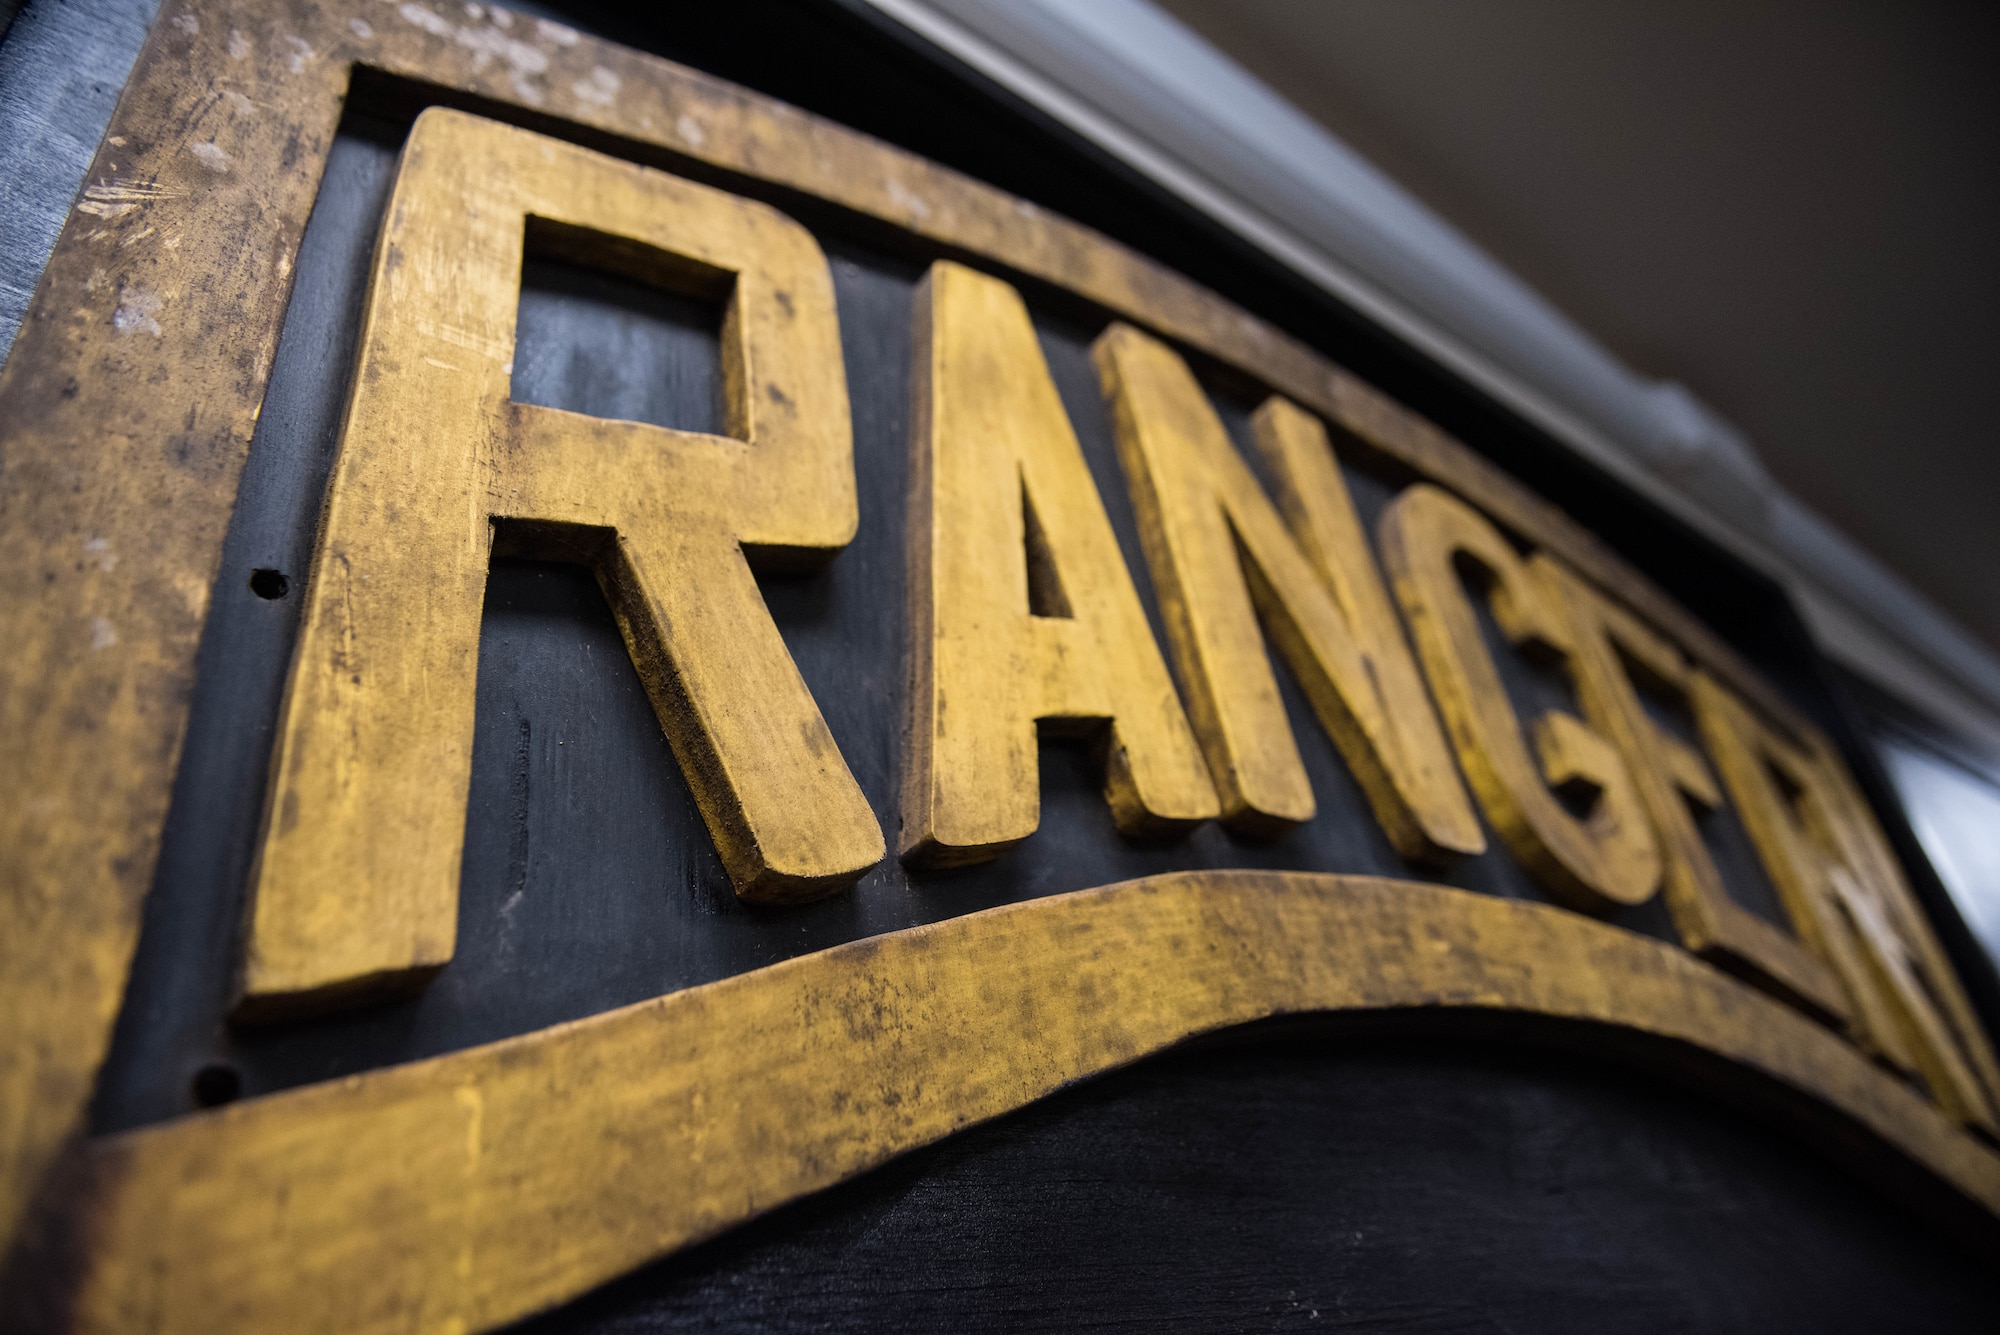 A Ranger sign hangs up inside at a training camp near Schofield Barracks, Oahu, Hawaii, May 13, 2019. Twenty-three Airmen from across the Air Force recently converged on a training camp for a three-week Ranger Assessment Course near Schofield Barracks, May 12-31, 2019. The purpose of the 19-day course is to prepare, assess and evaluate Air Force candidates for Army Ranger School. (U.S. Air Force photo by Staff Sgt. Hailey Haux)